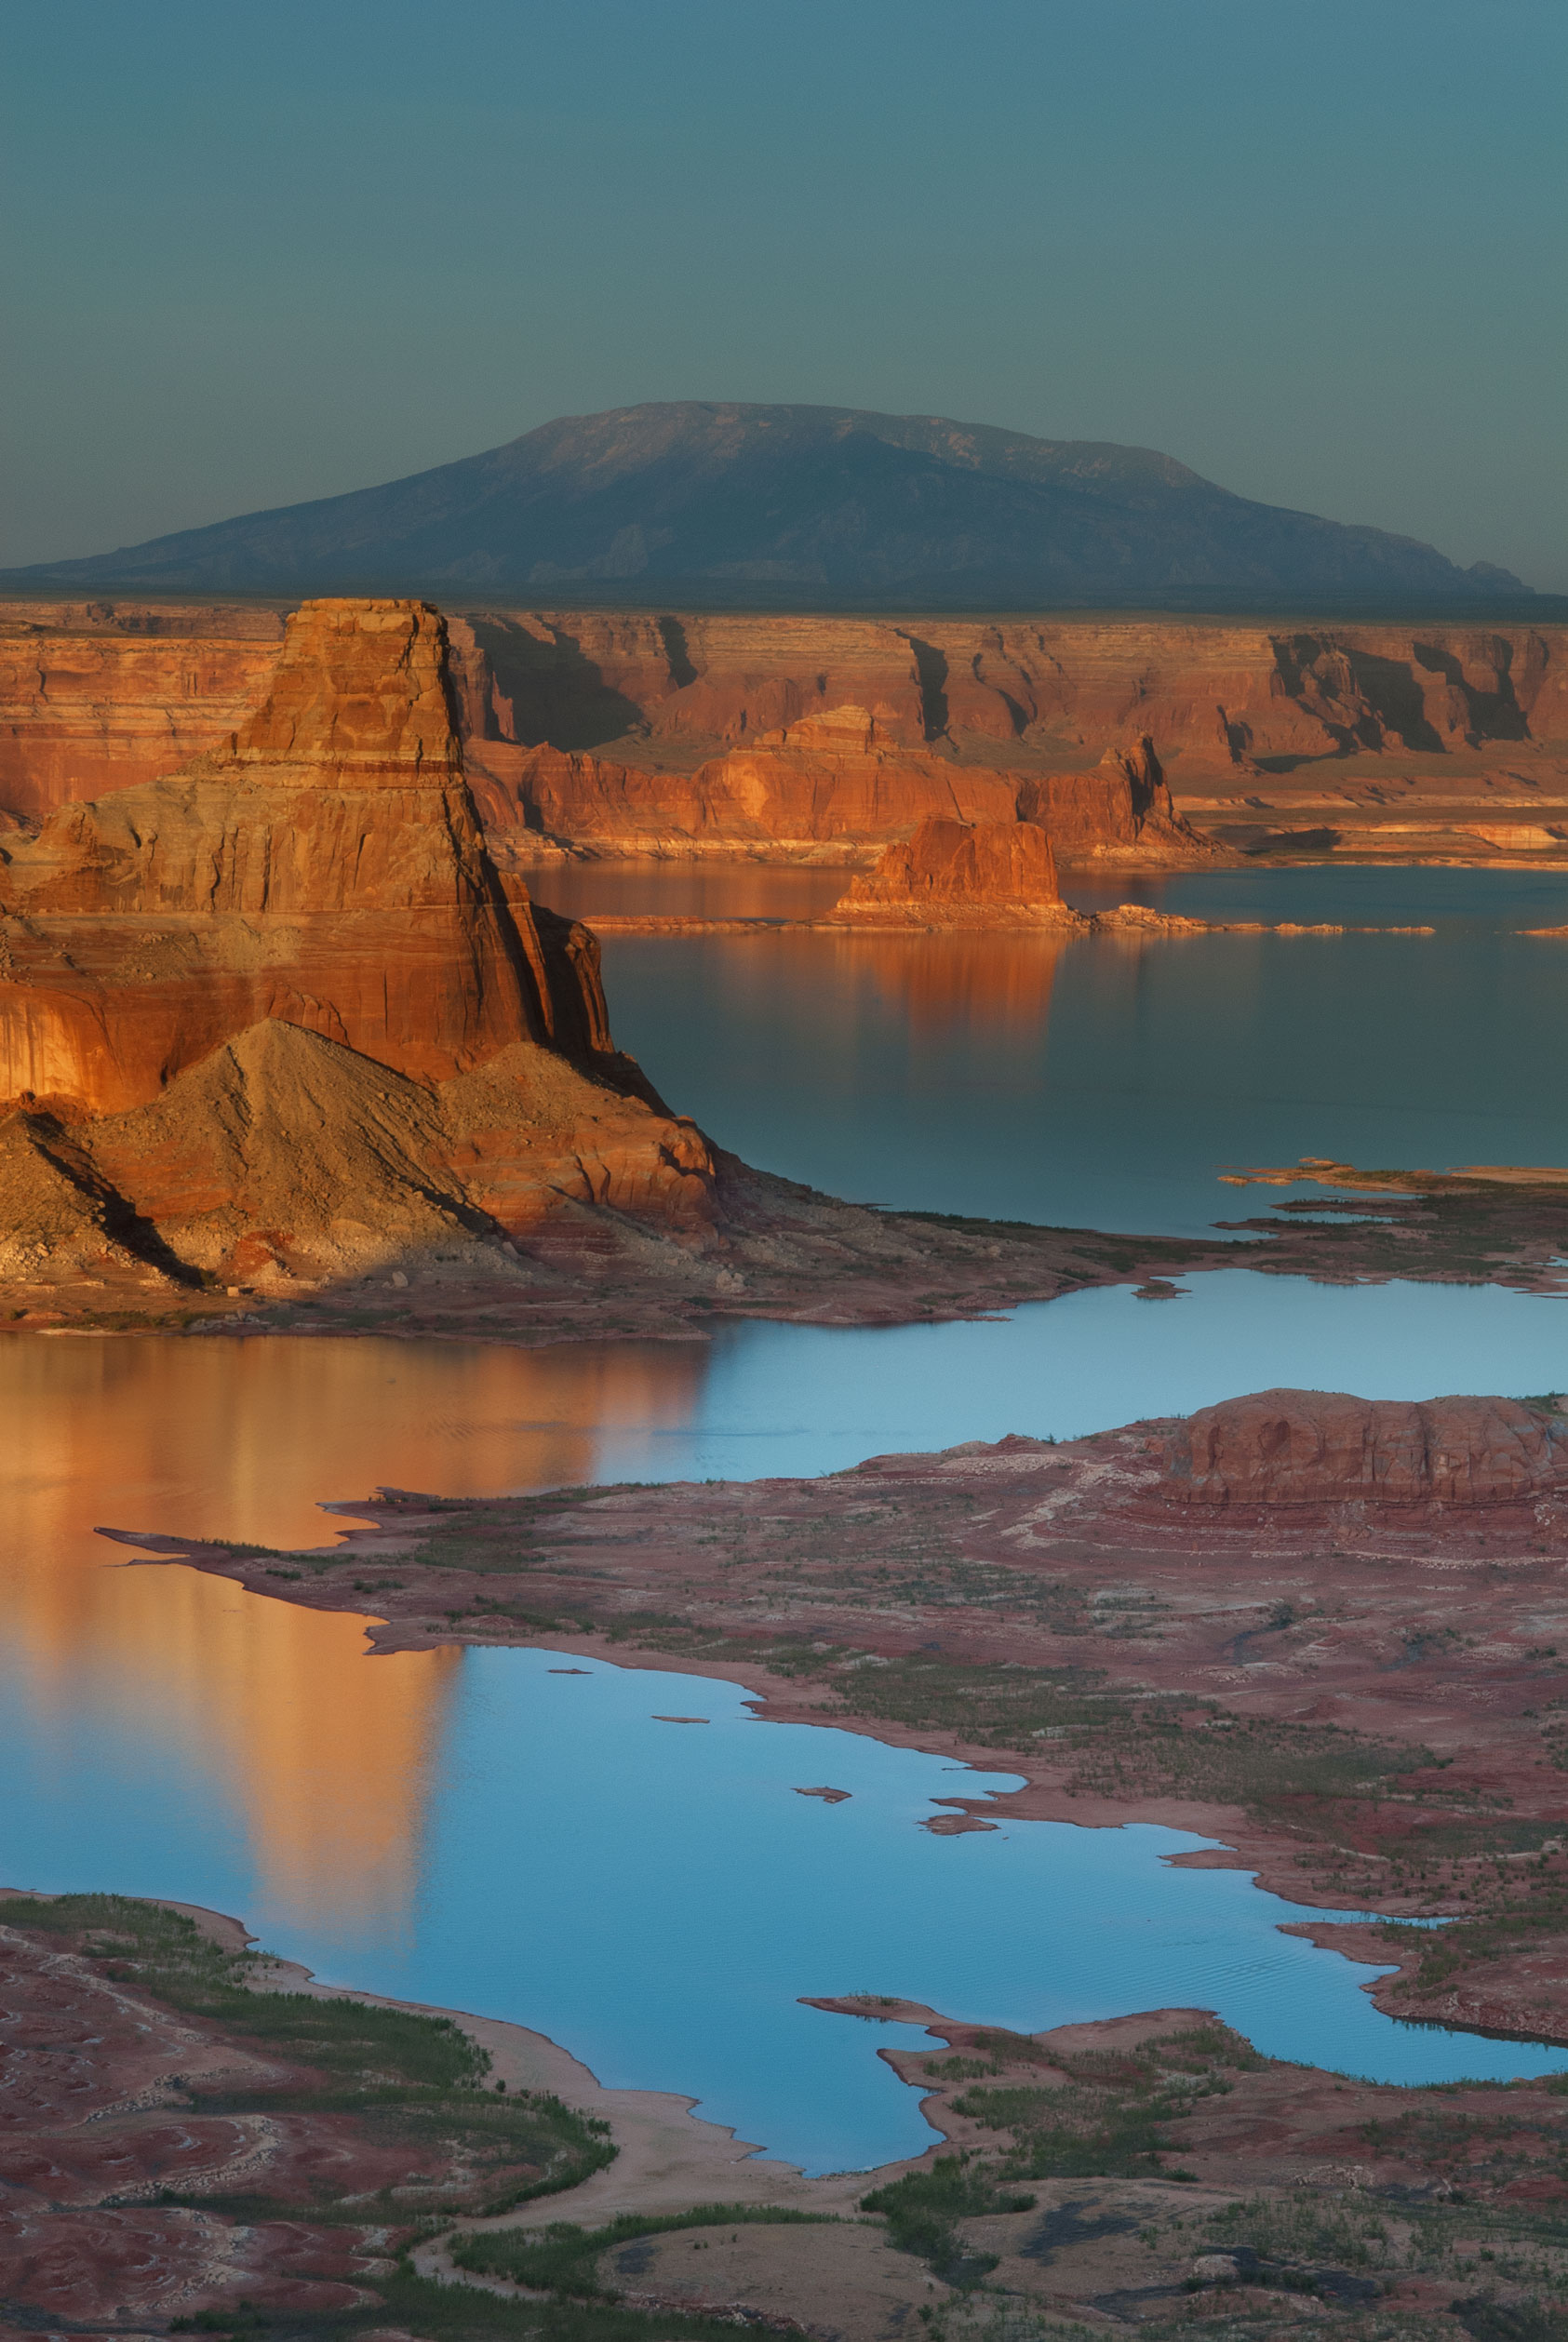 Lake Powell from Alstrom Point, Utah, looking toward Gunsight Butte and Navajo Mt.